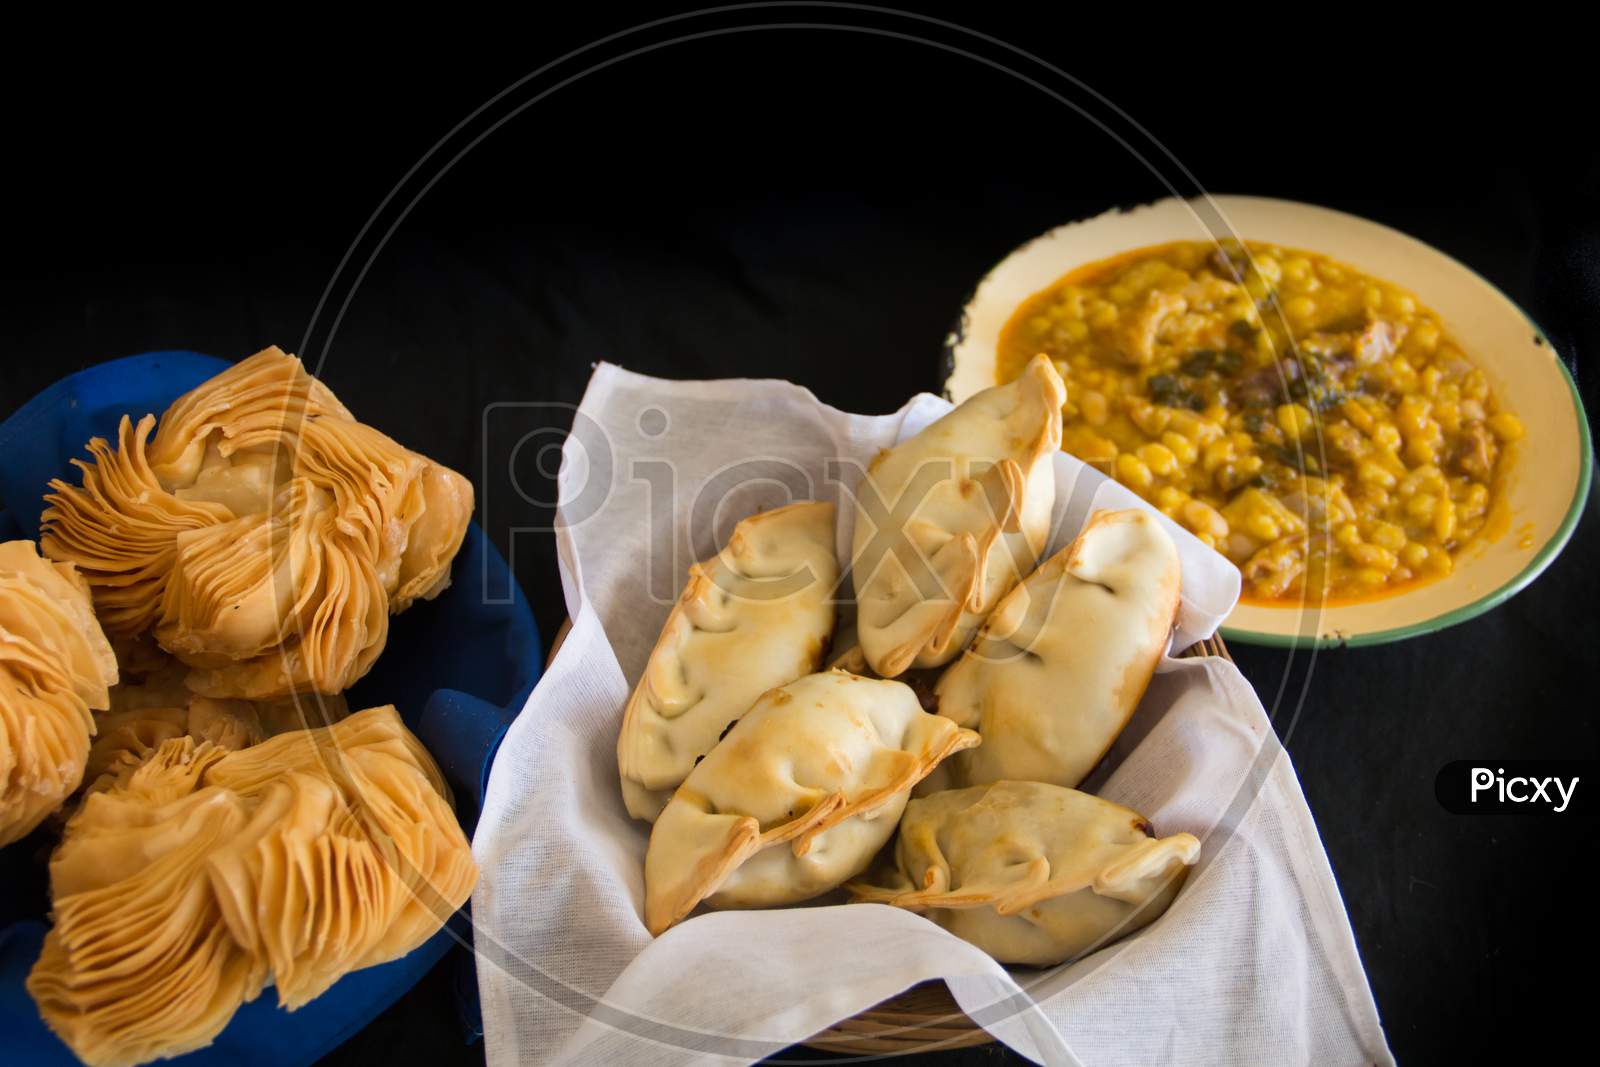 Dishes Of Locro Empanadas And Sweet Pastries, Traditional Argentine Foods That Are Frequently Consumed For National Holidays, Such As The Revolution Of May 25 And Independence On July 9